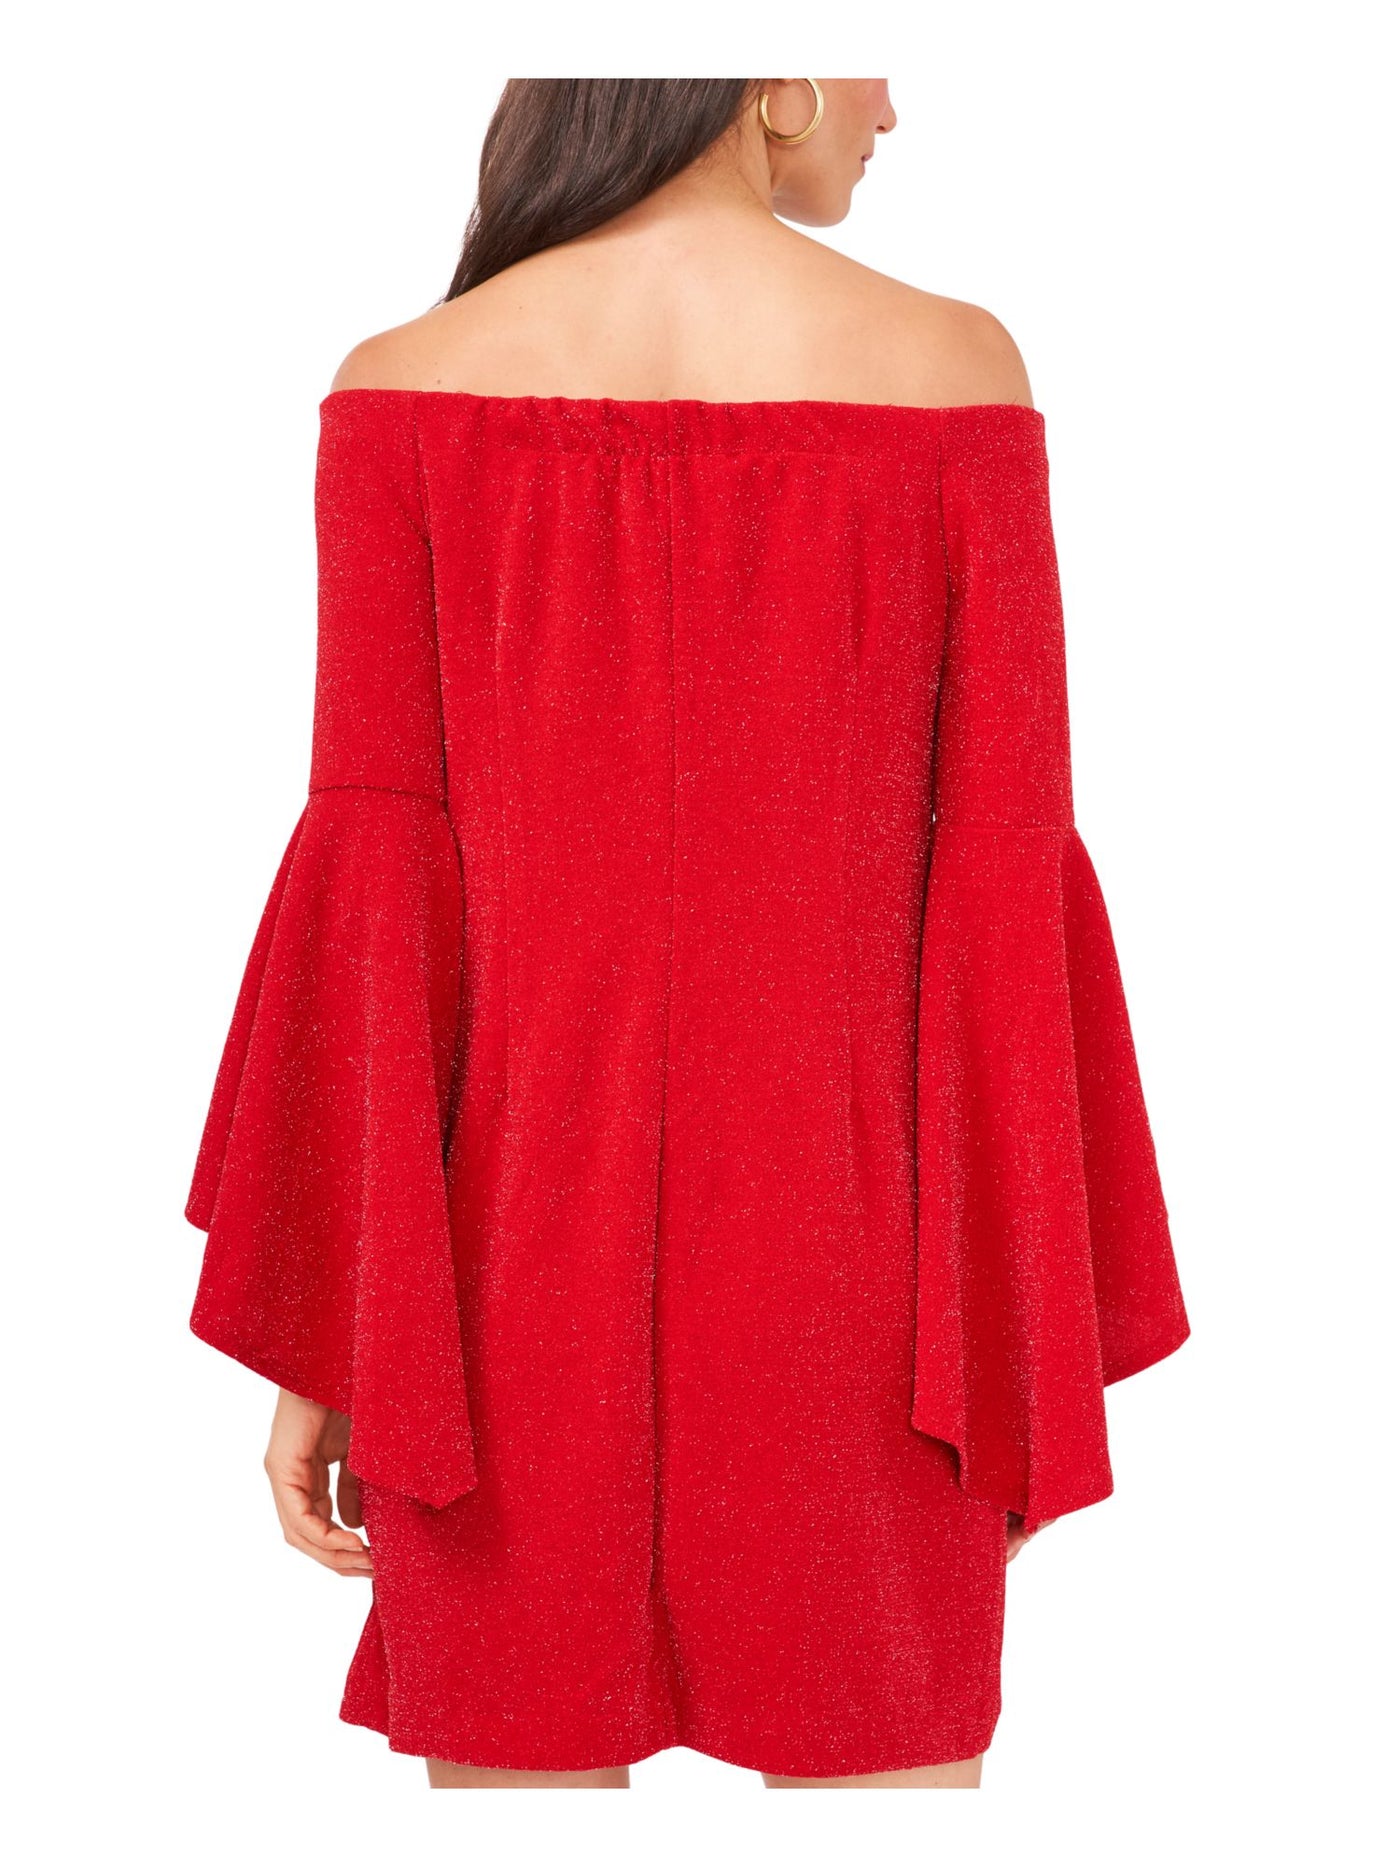 VINCE CAMUTO Womens Red Glitter Pullover Lined Bell Sleeve Off Shoulder Short Cocktail Shift Dress XS